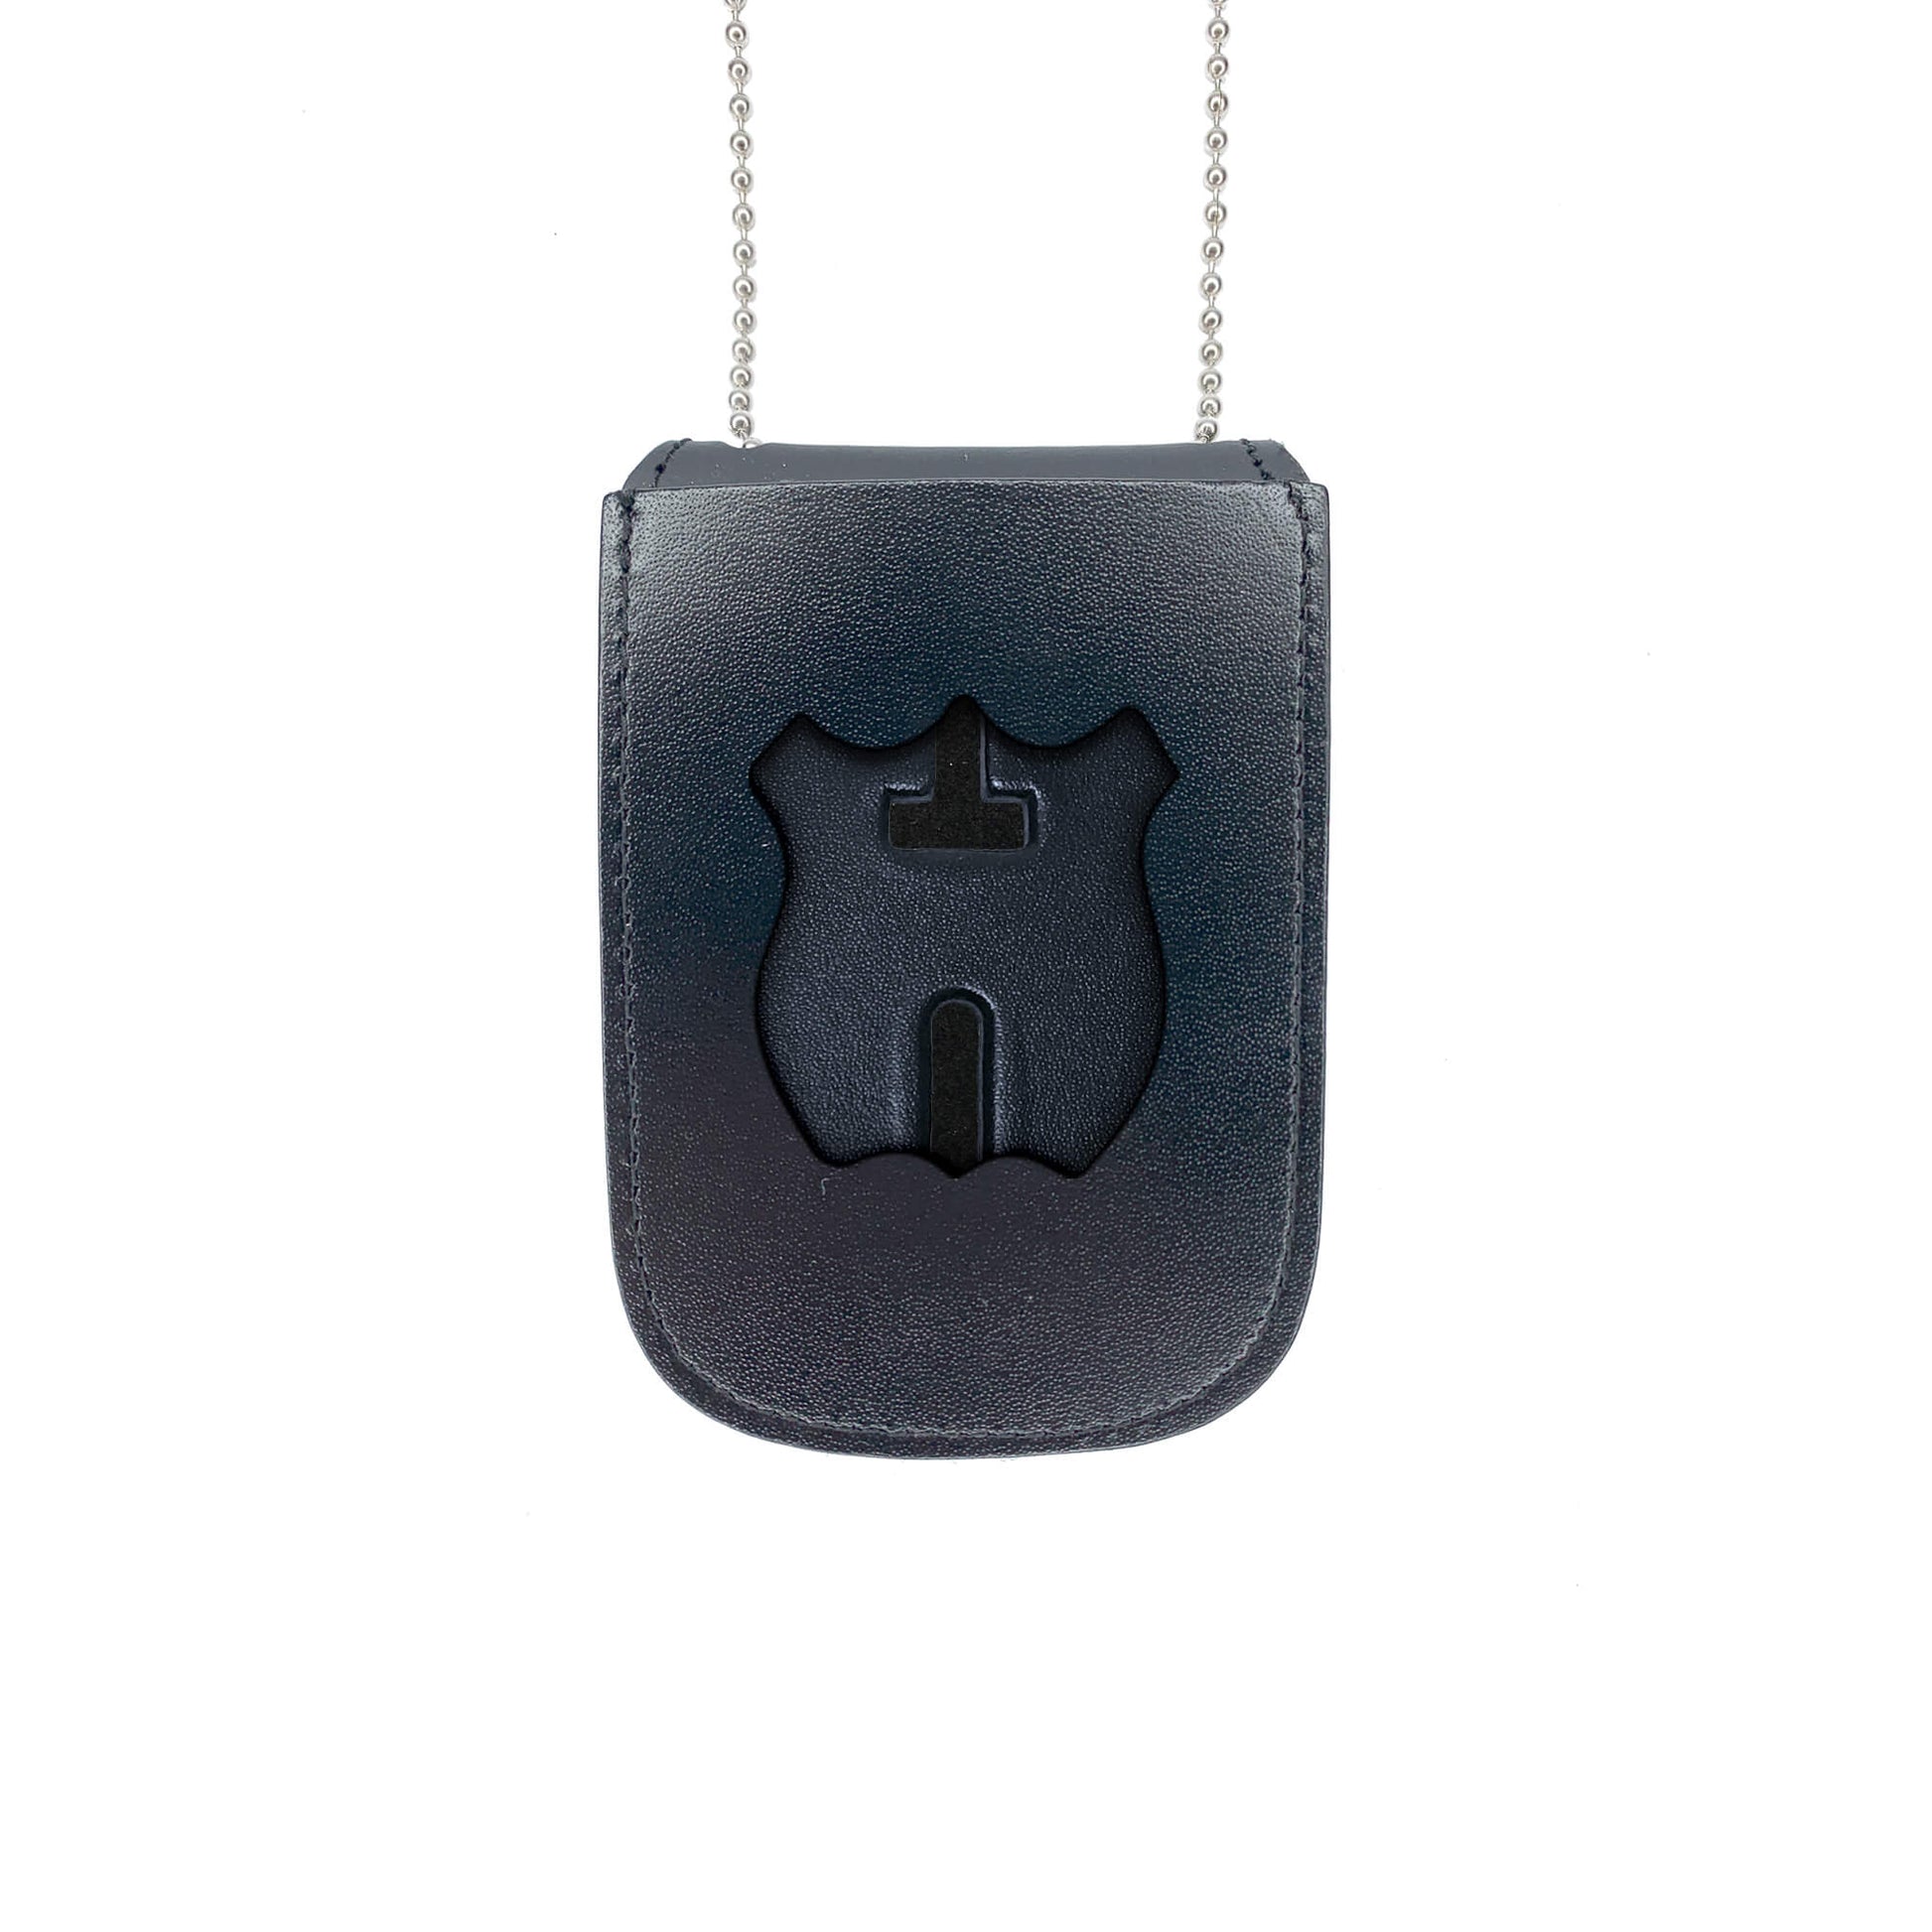 Ontario Provincial Police OPP Recessed Badge & ID Holder-Perfect Fit-911 Duty Gear Canada